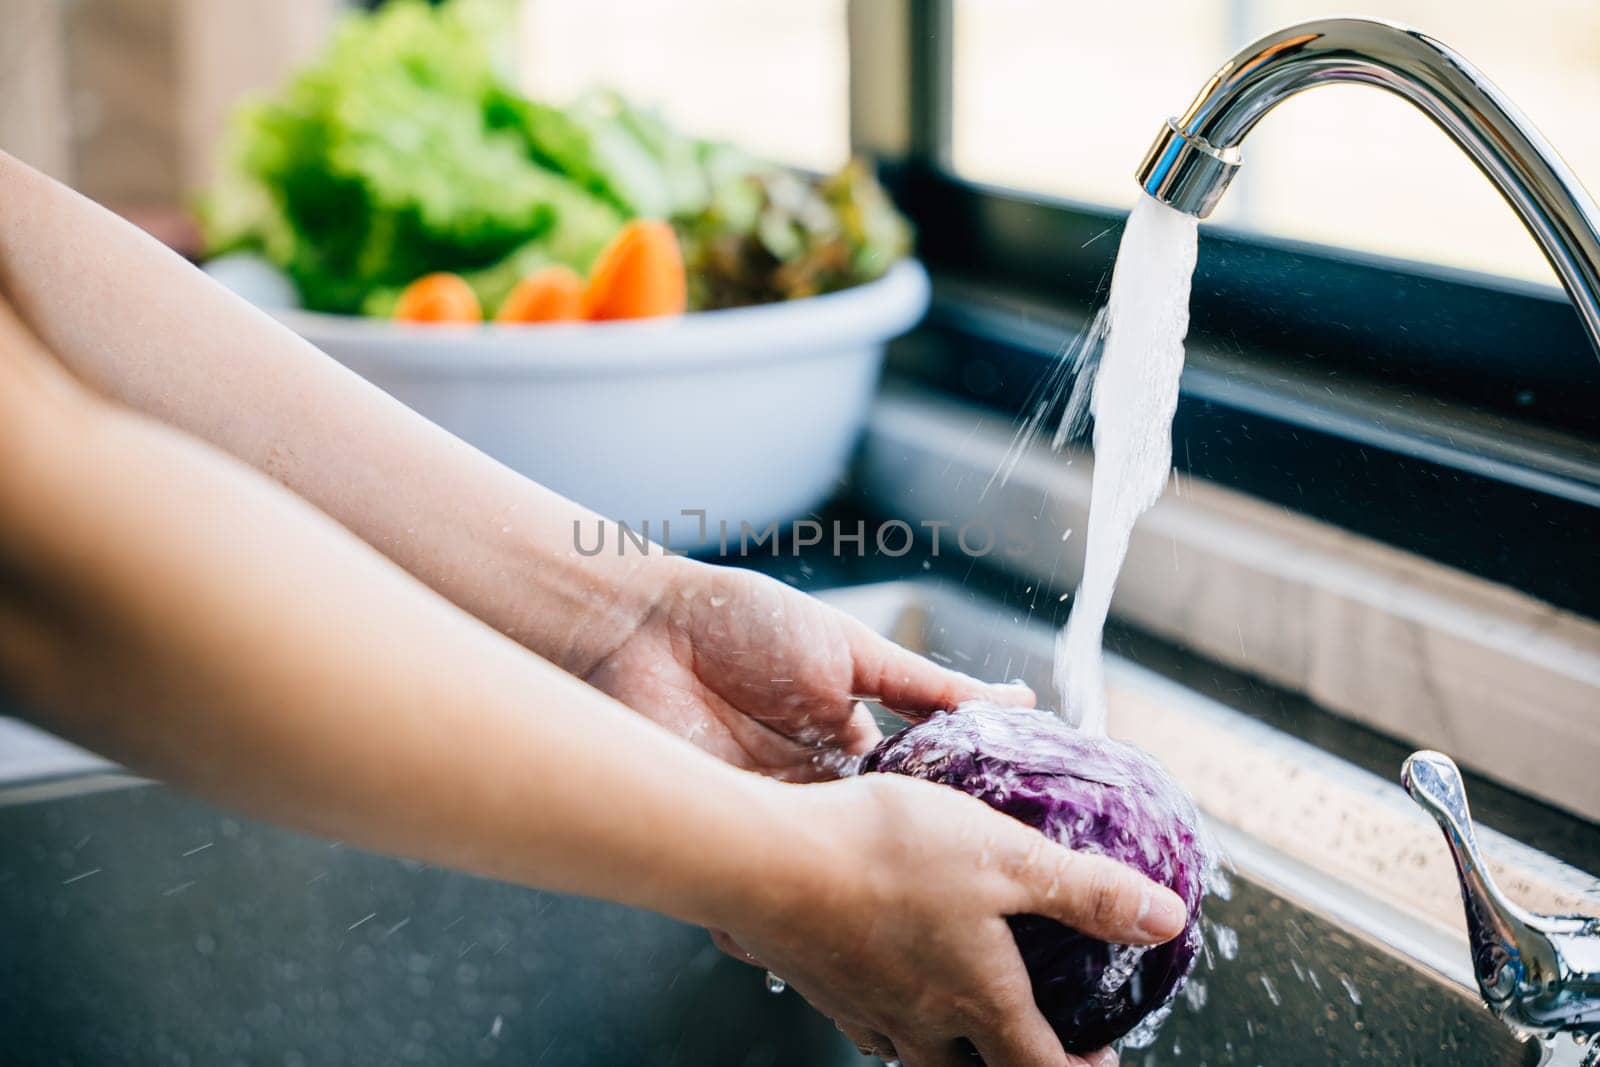 Freshness in homemade food, Woman washes fresh vegetables under running water in a modern kitchen sink for a vegan salad. Emphasizing cleanliness and healthy eating habits.